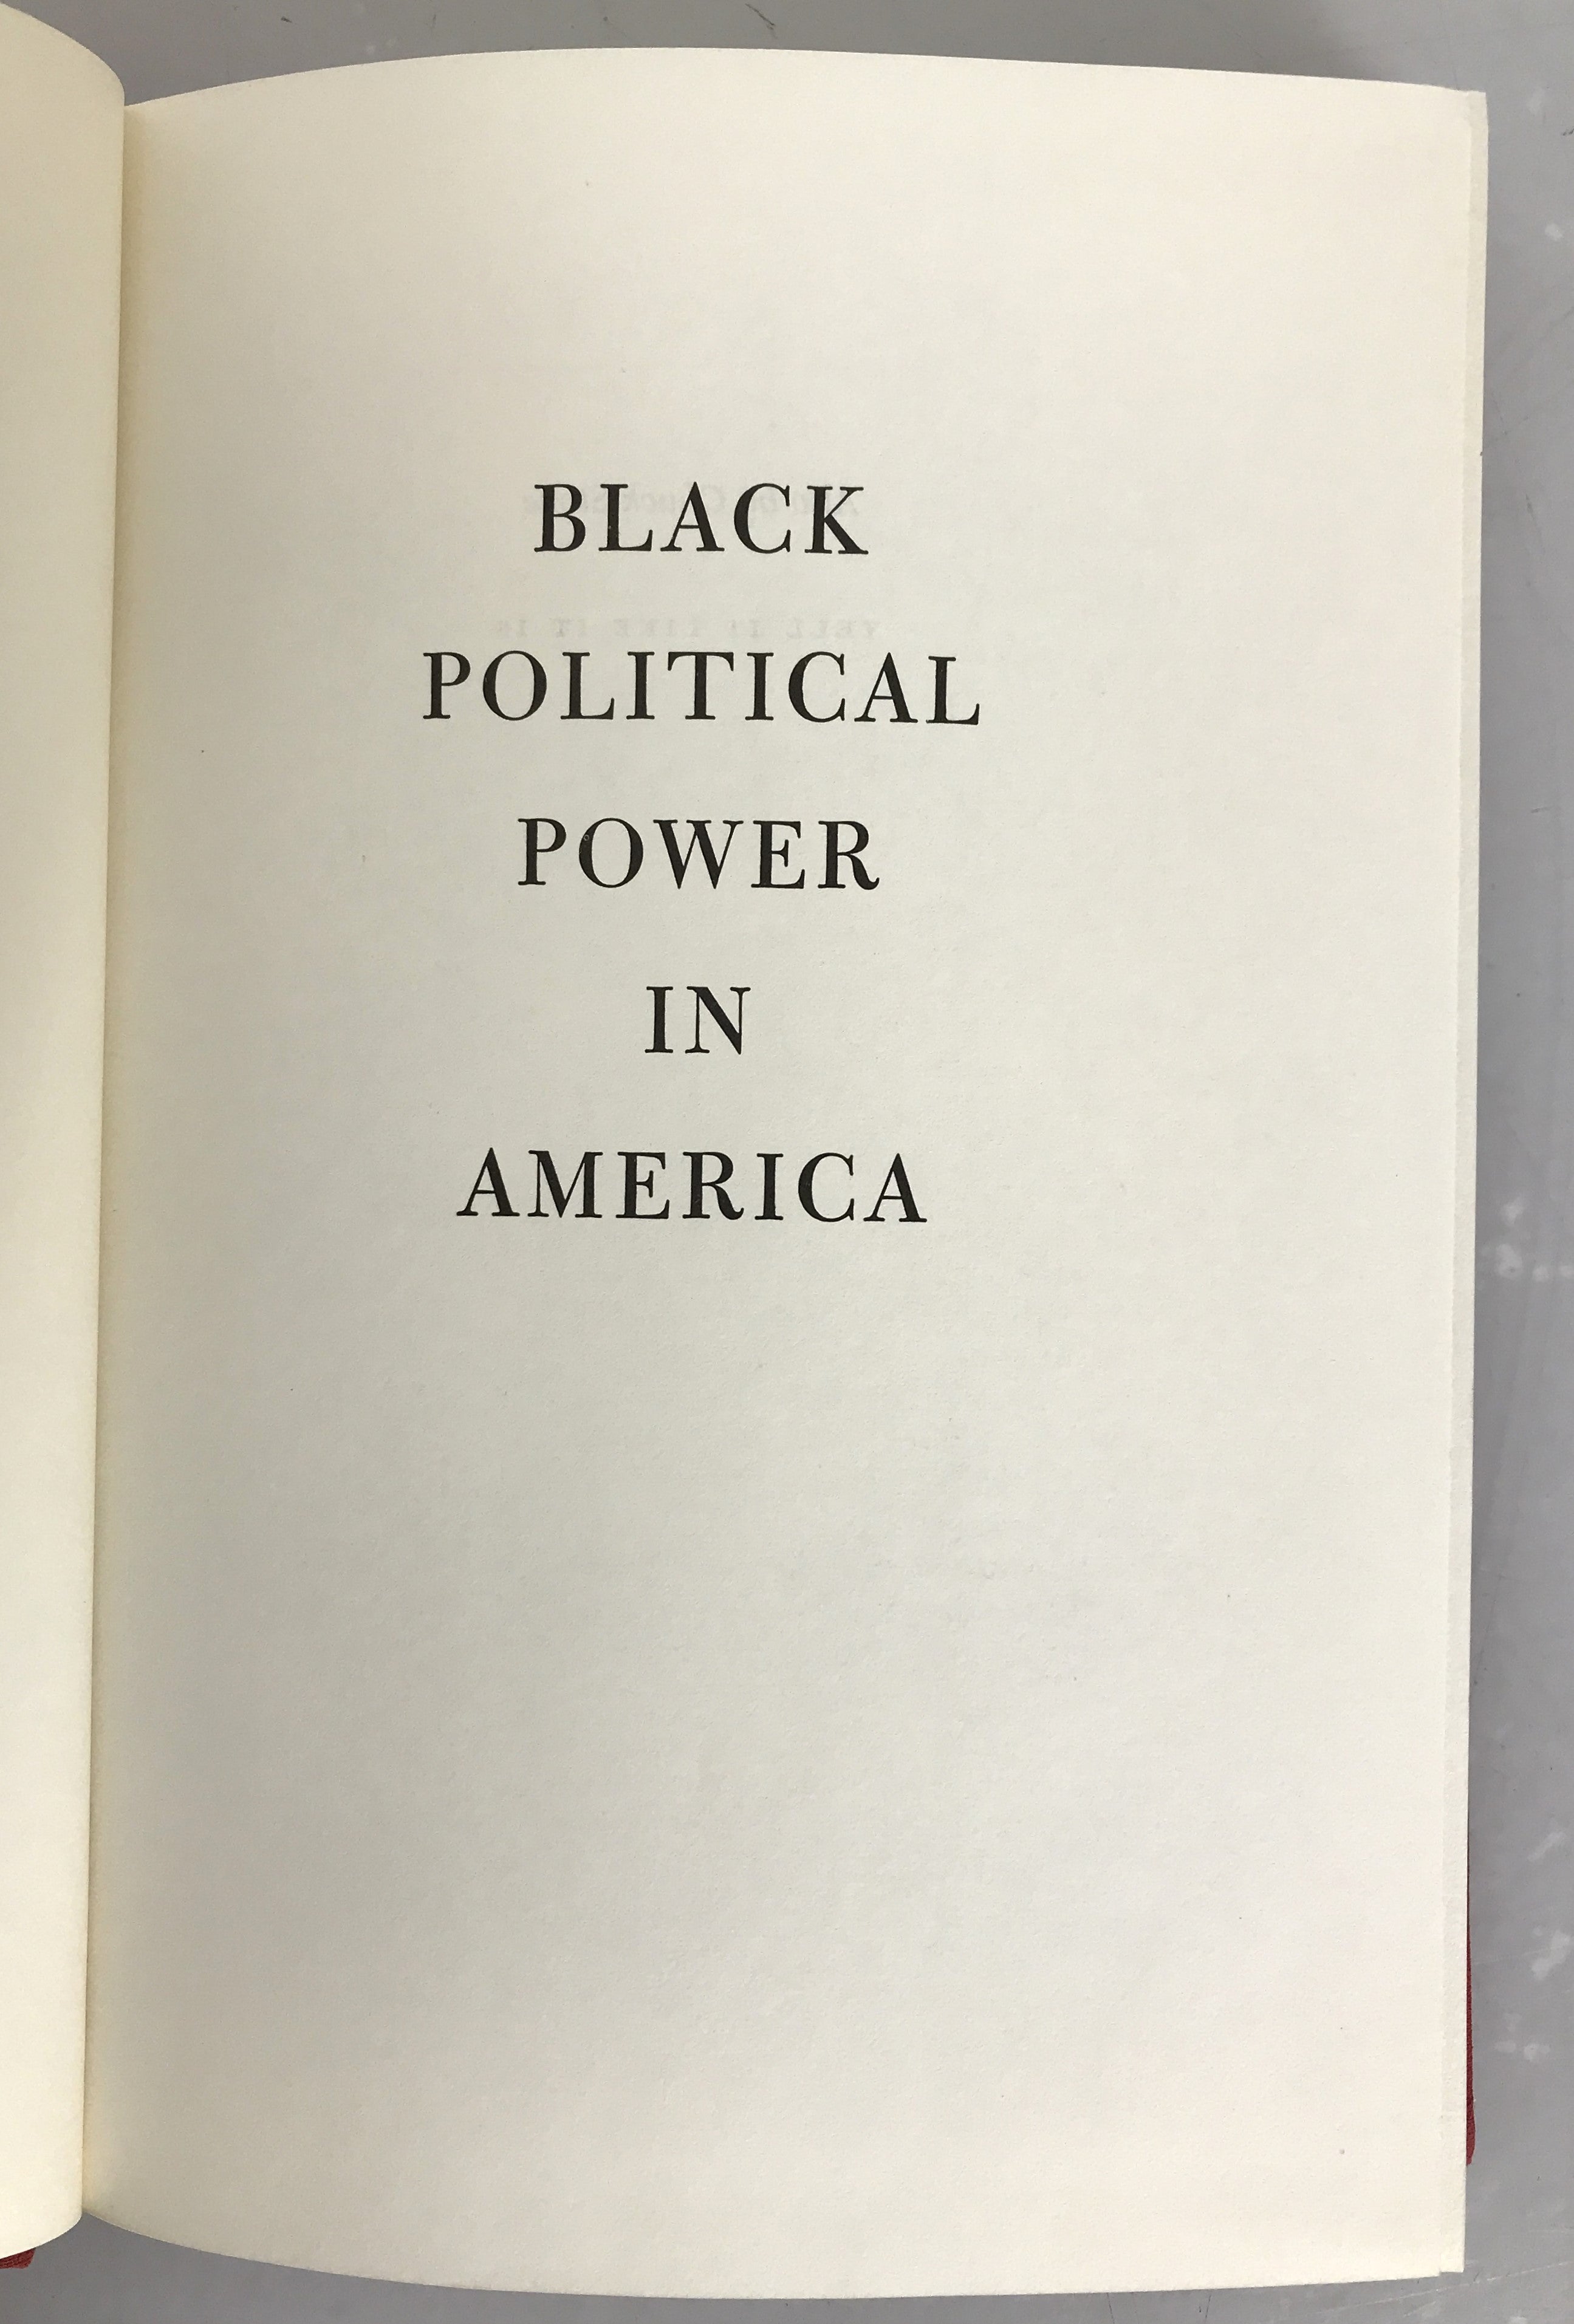 Black Political Power in America by Chuck Stone First Printing 1968 HC DJ